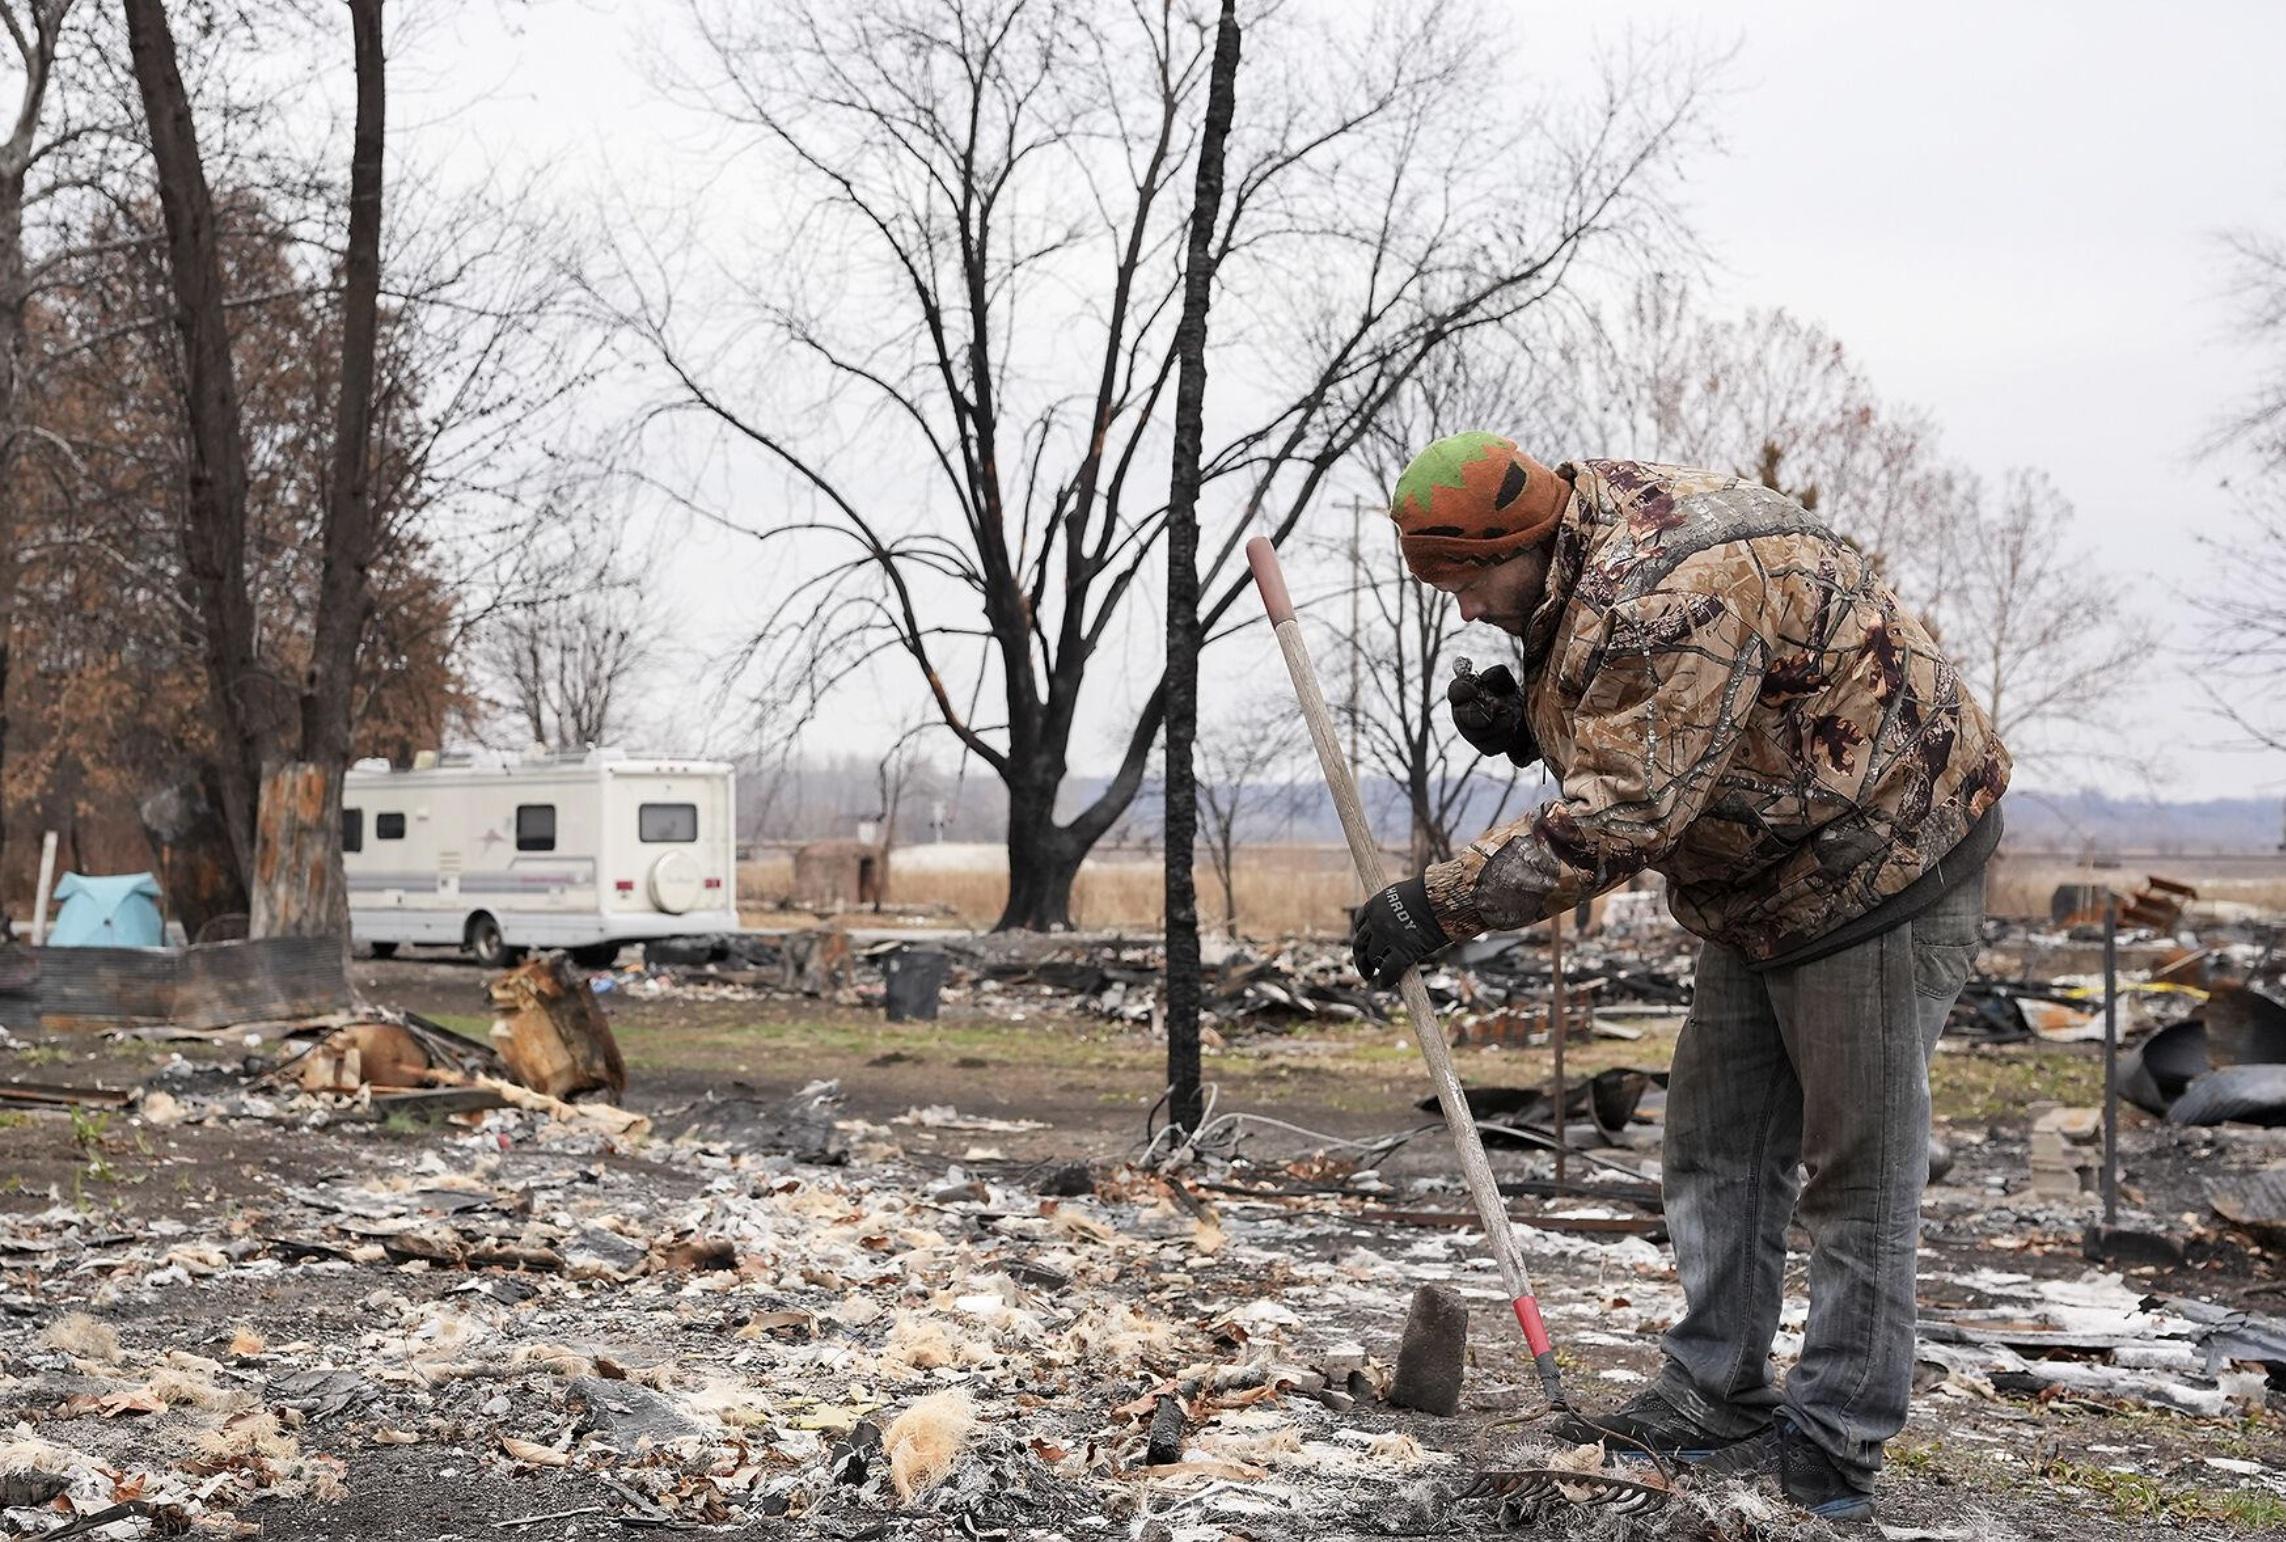 No relief:  Lack of government help leaves fire survivors relying on donations